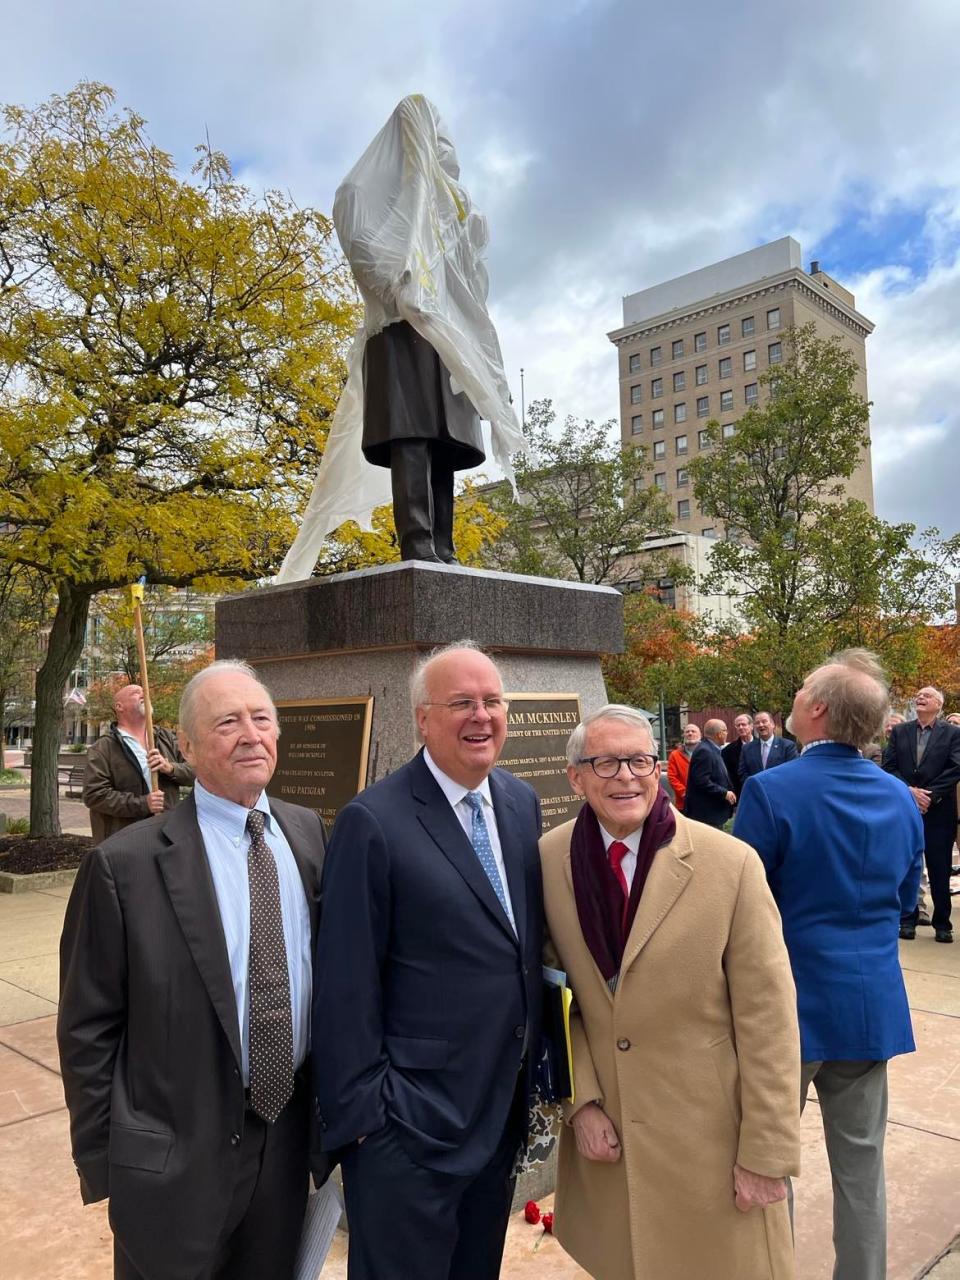 From left, W. R. Timken Jr., Karl Rove and Gov. Mike DeWine are shown at the Saturday unveiling of a President William McKinley statue in downtown Canton.